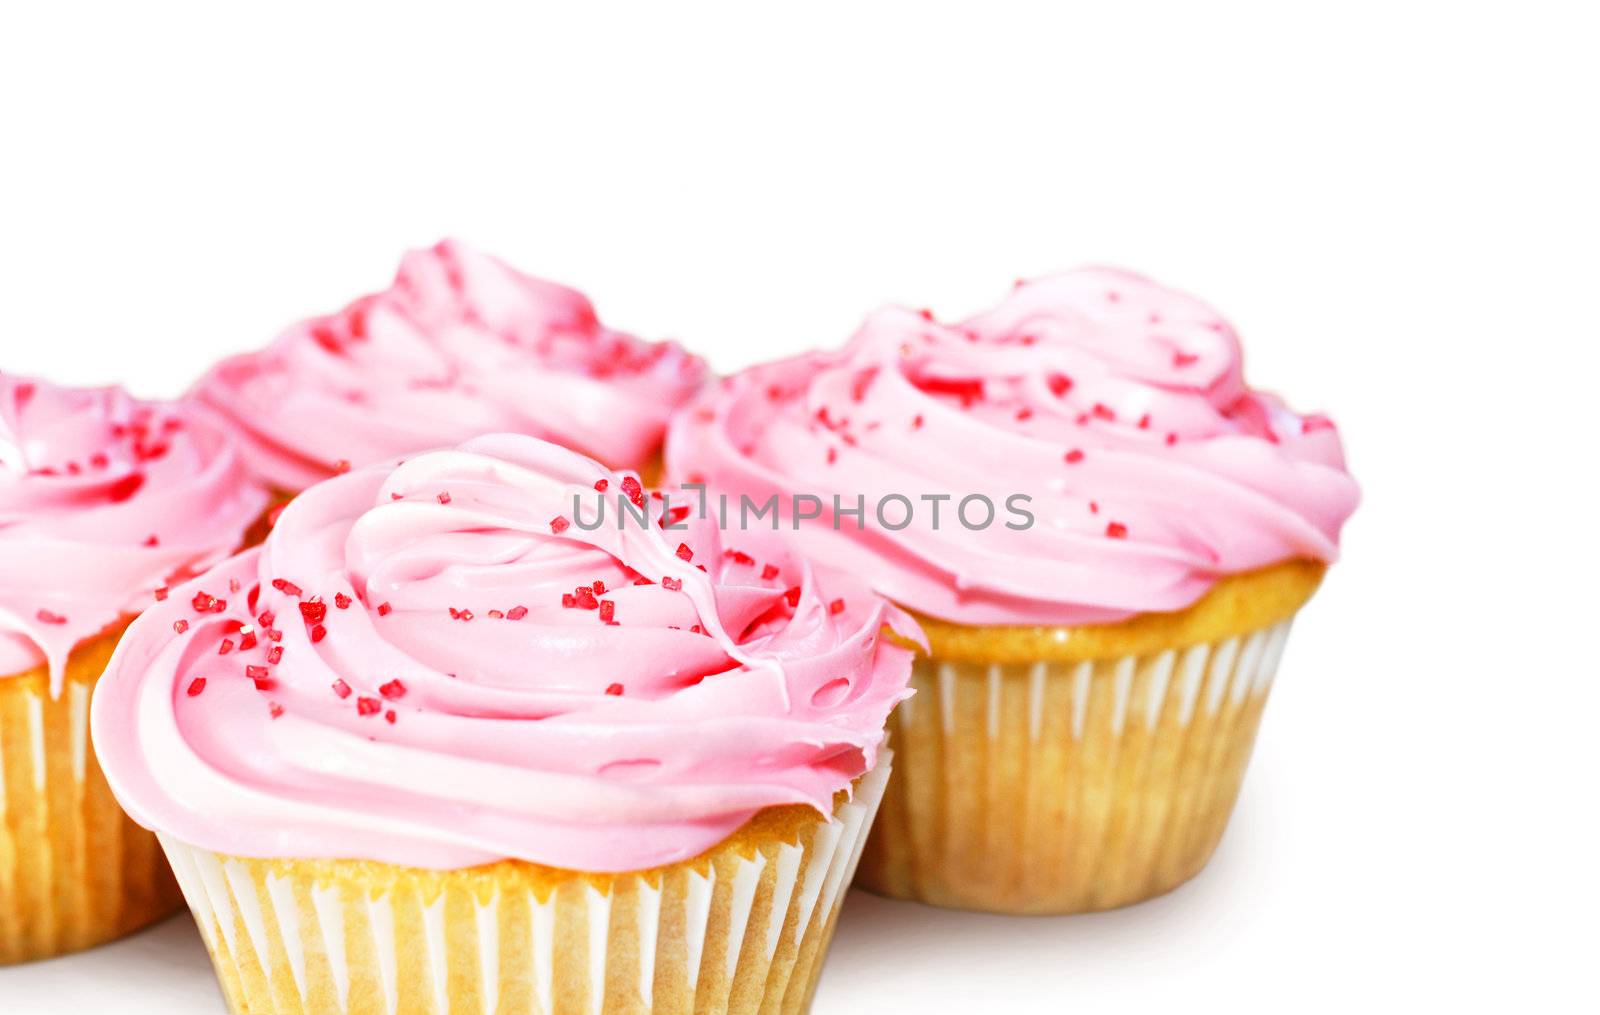 Cupcakes with pink frosting by Mirage3